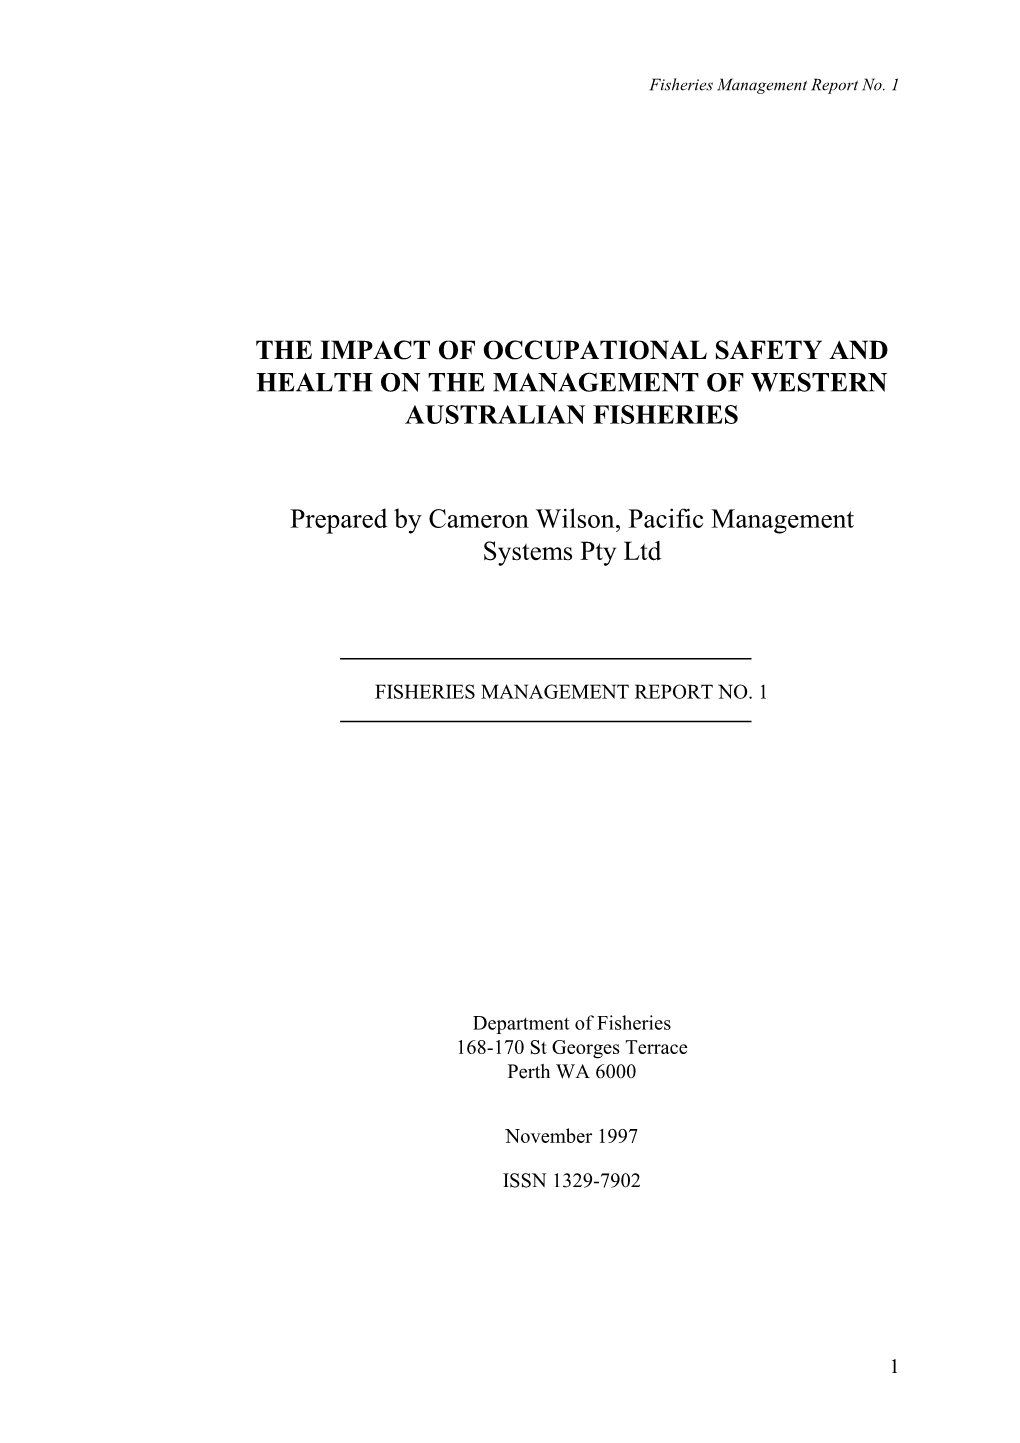 The Impact of Occupational Safety and Health on the Management of Western Australia Fisheries